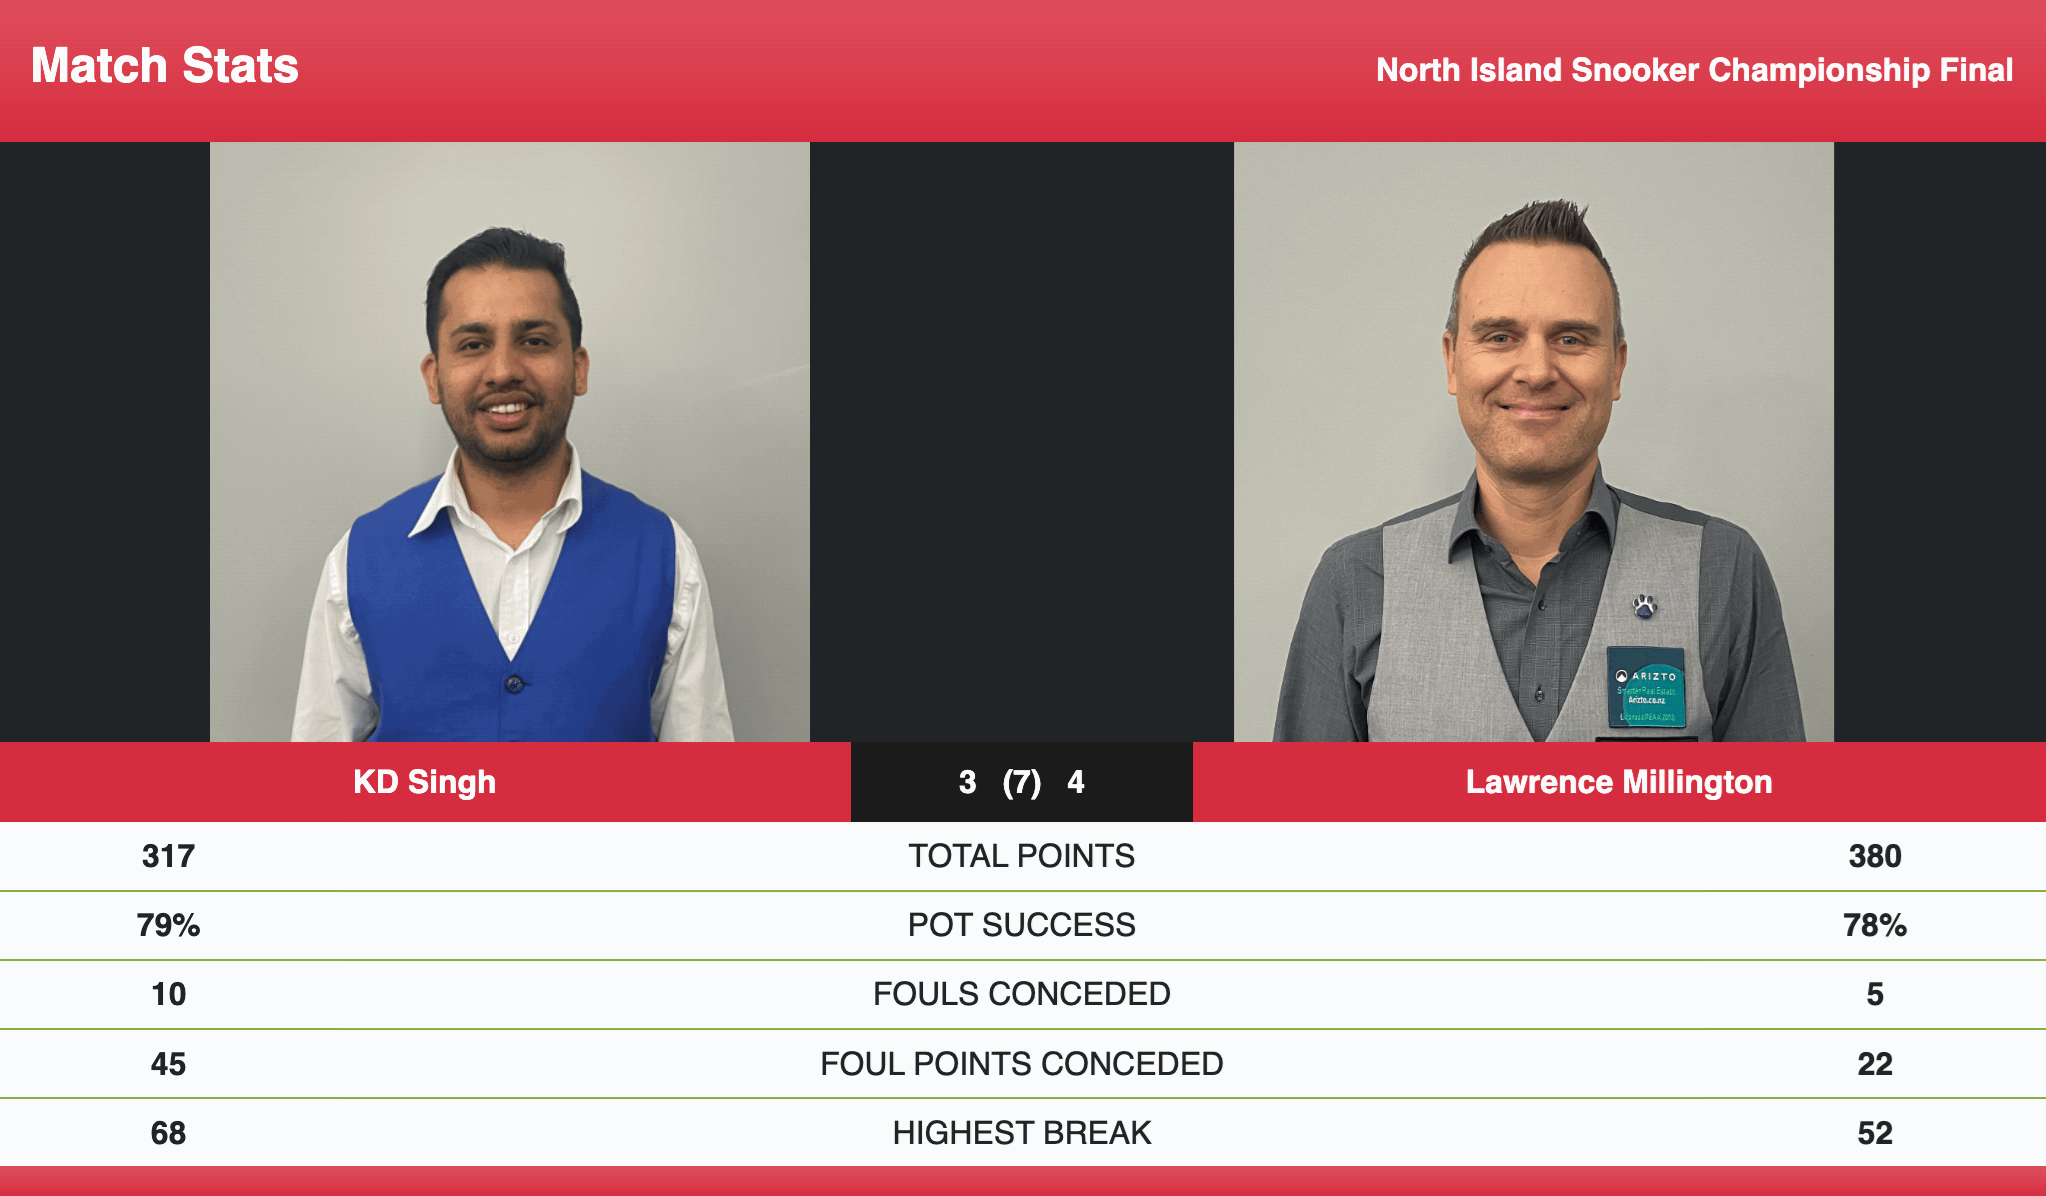 2022 North Island Snooker Results